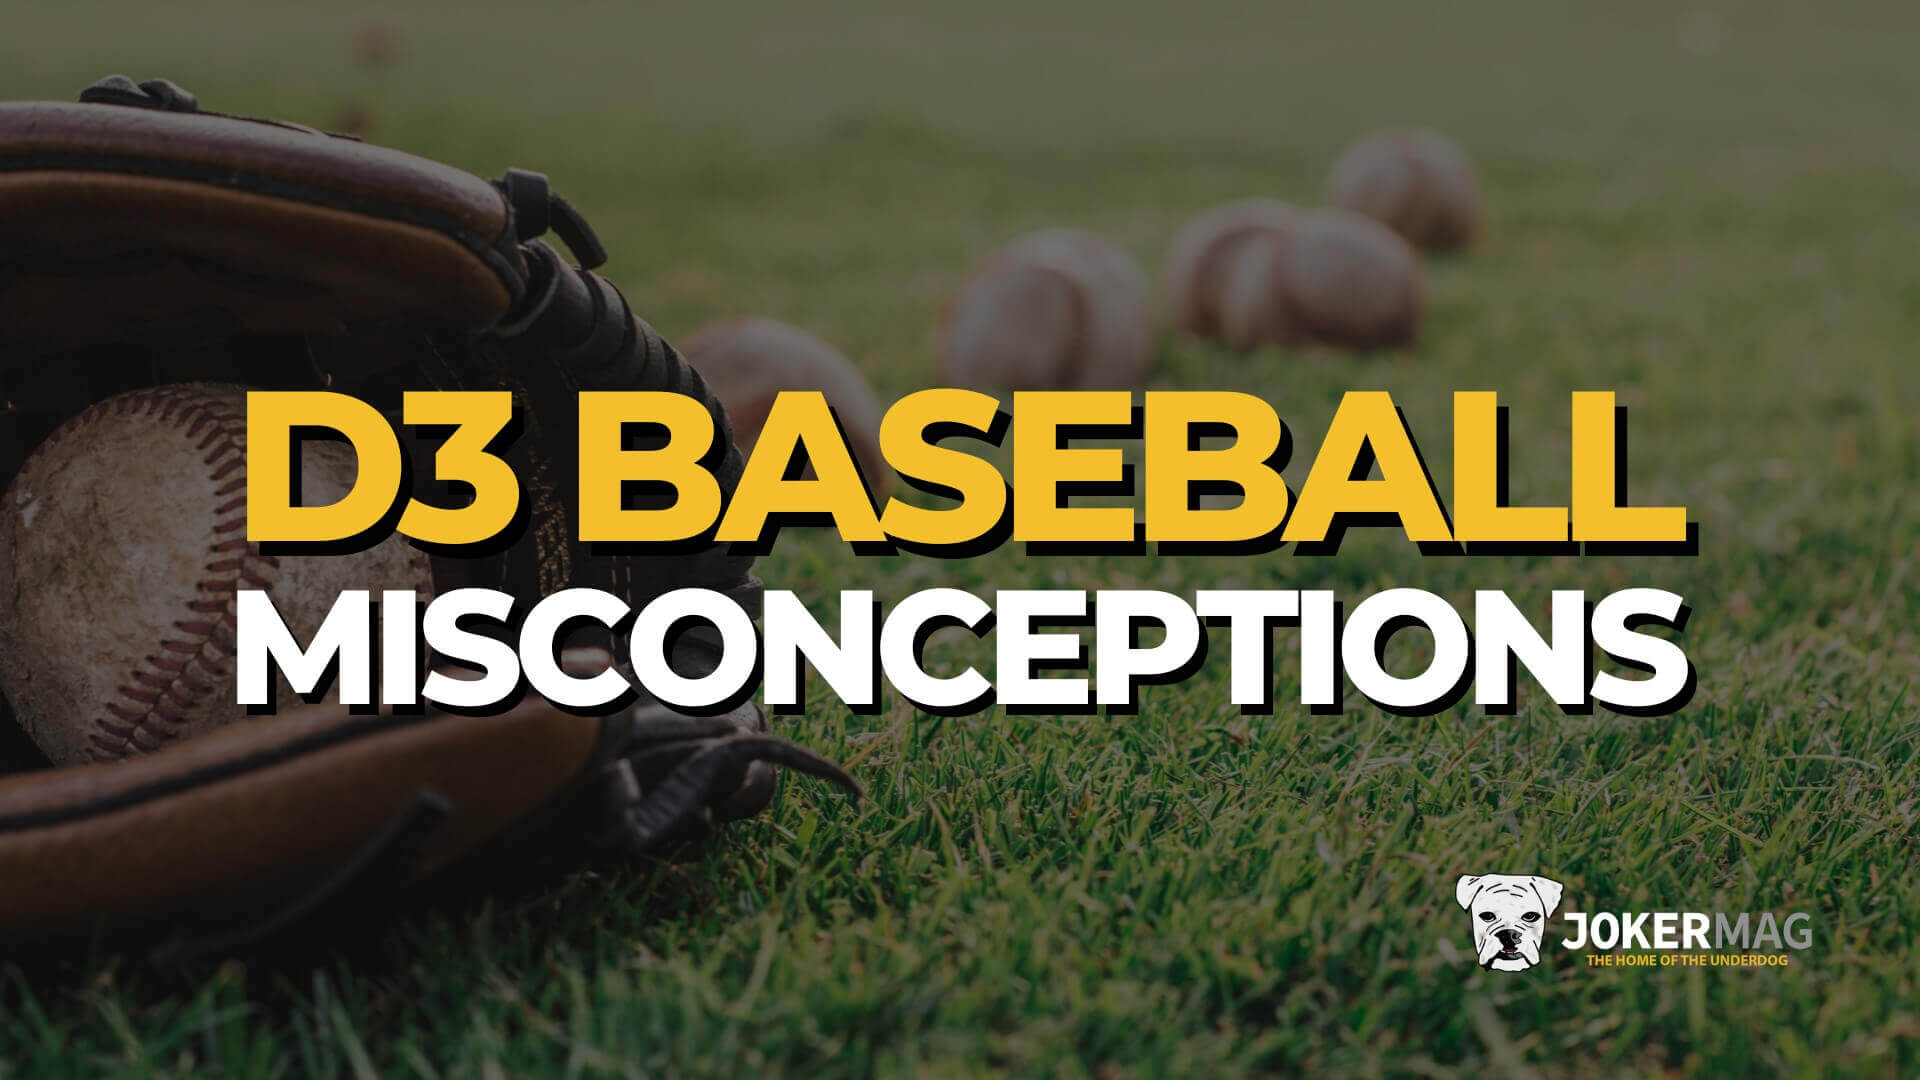 Breaking down the biggest misconceptions about D3 baseball, according to college coaches